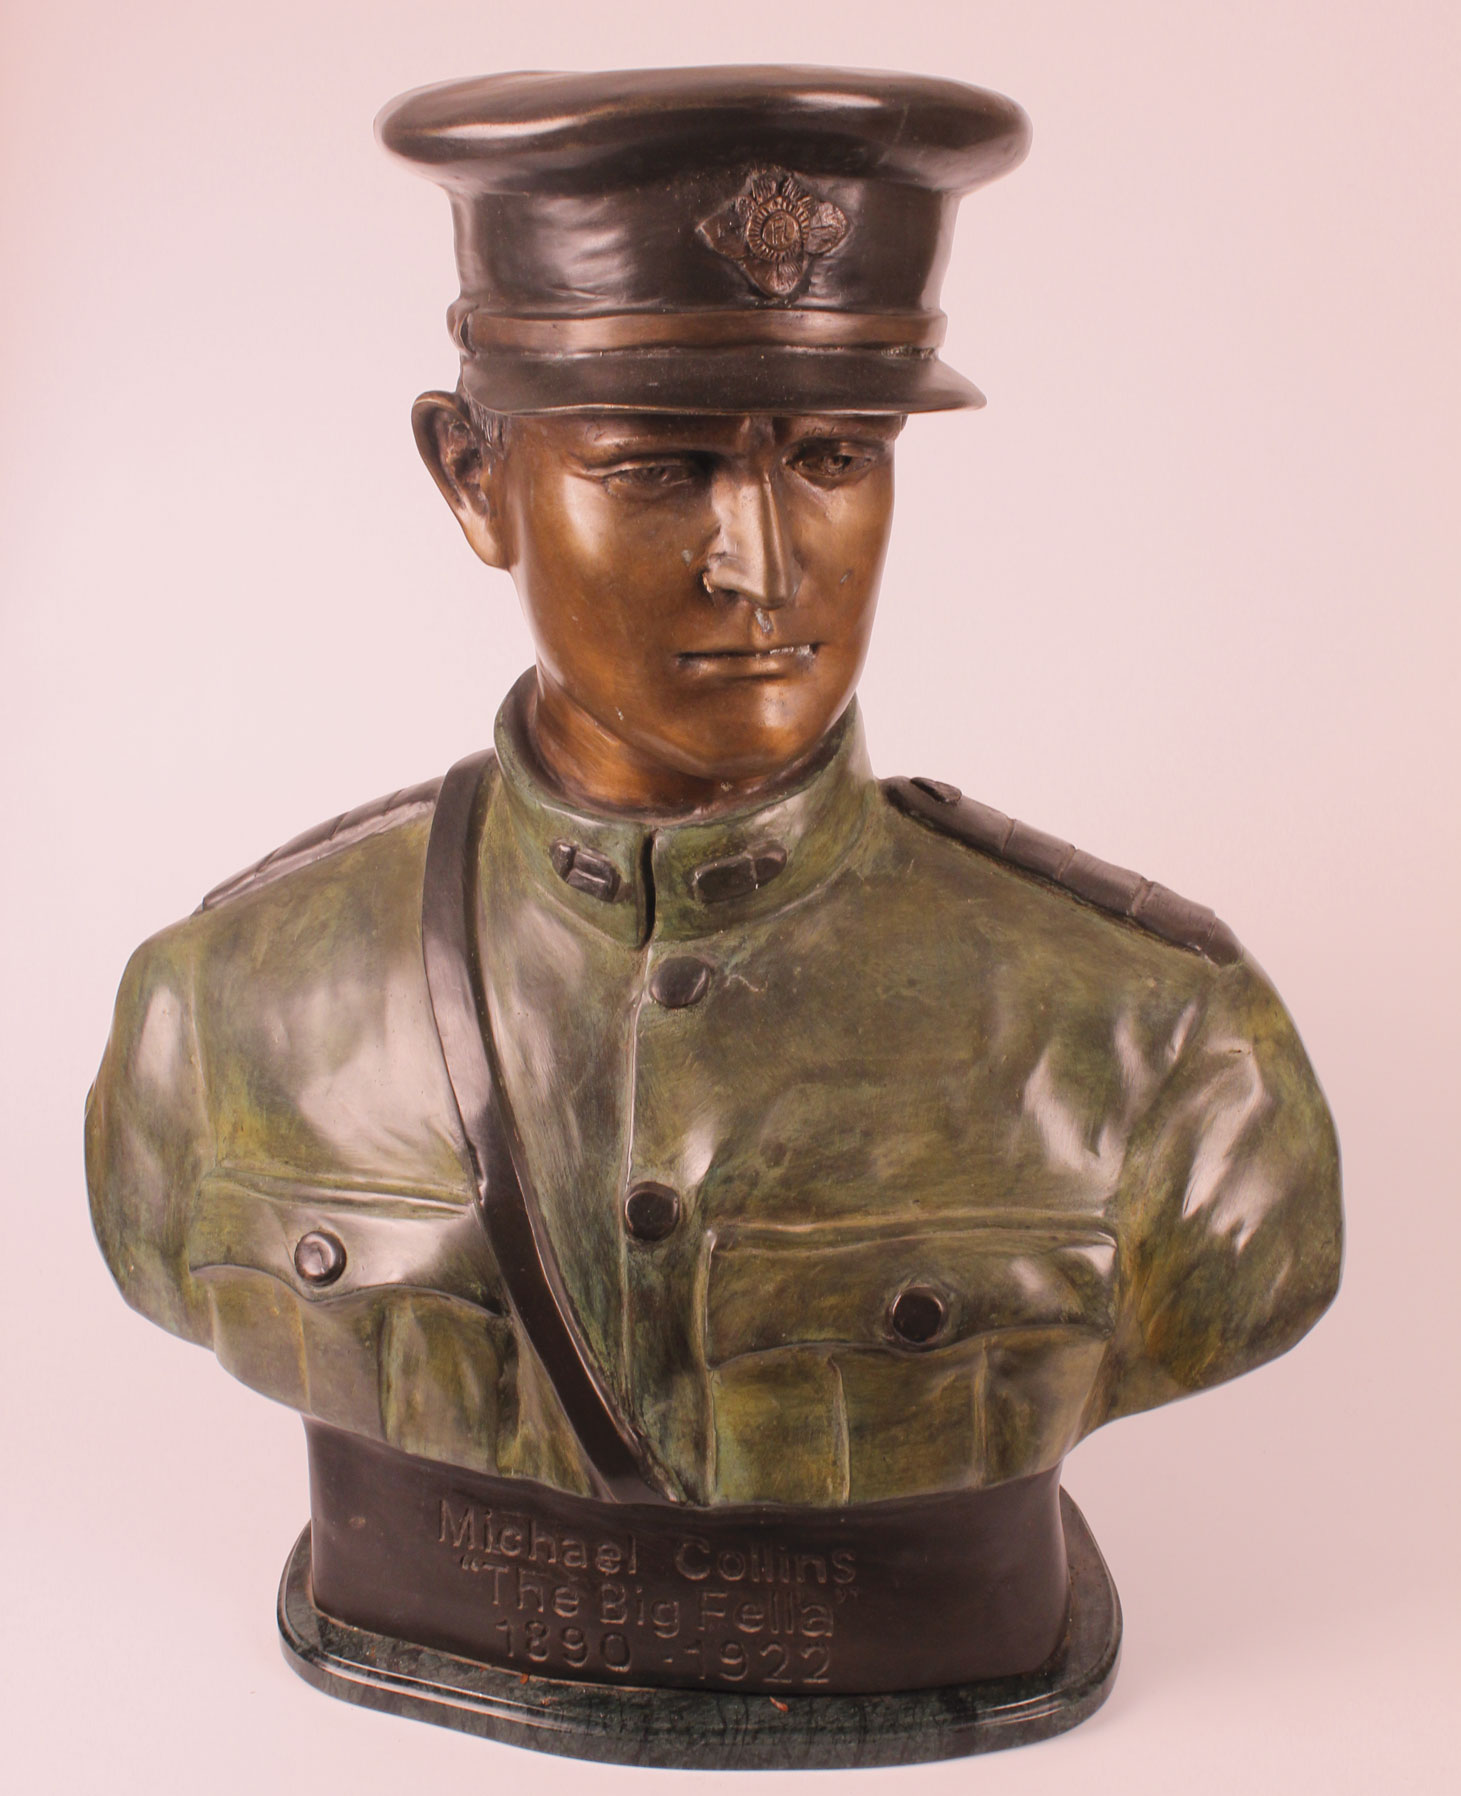 20th Century: Large Michael Collins bust at Whyte's Auctions